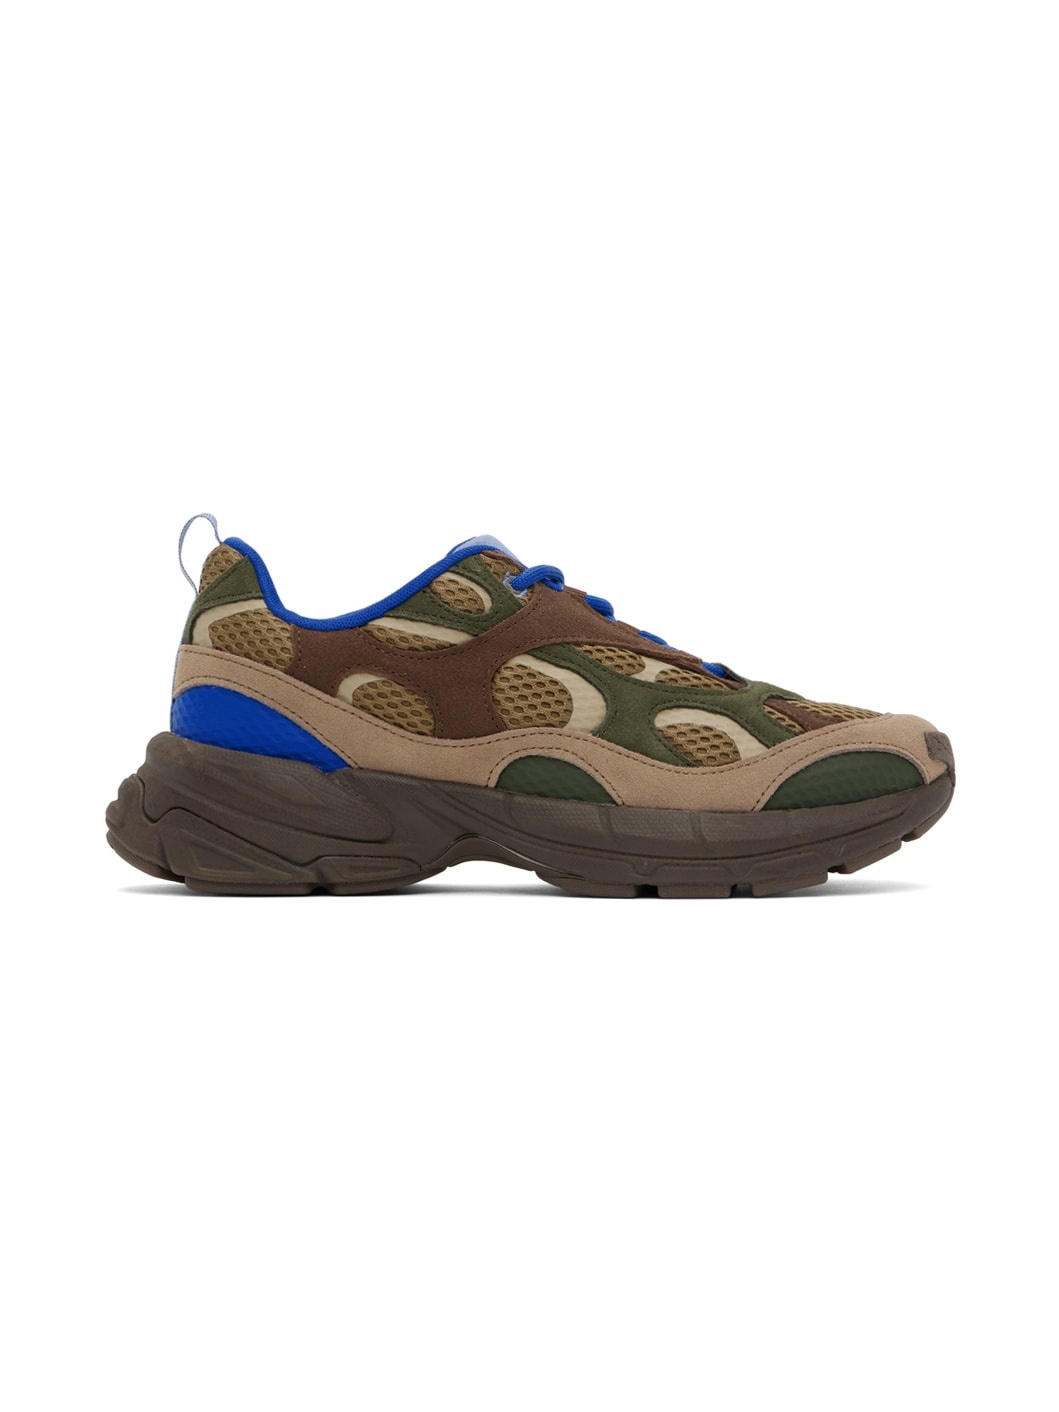 Brown & Blue Puma Edition Velophasis Sneakers - 1